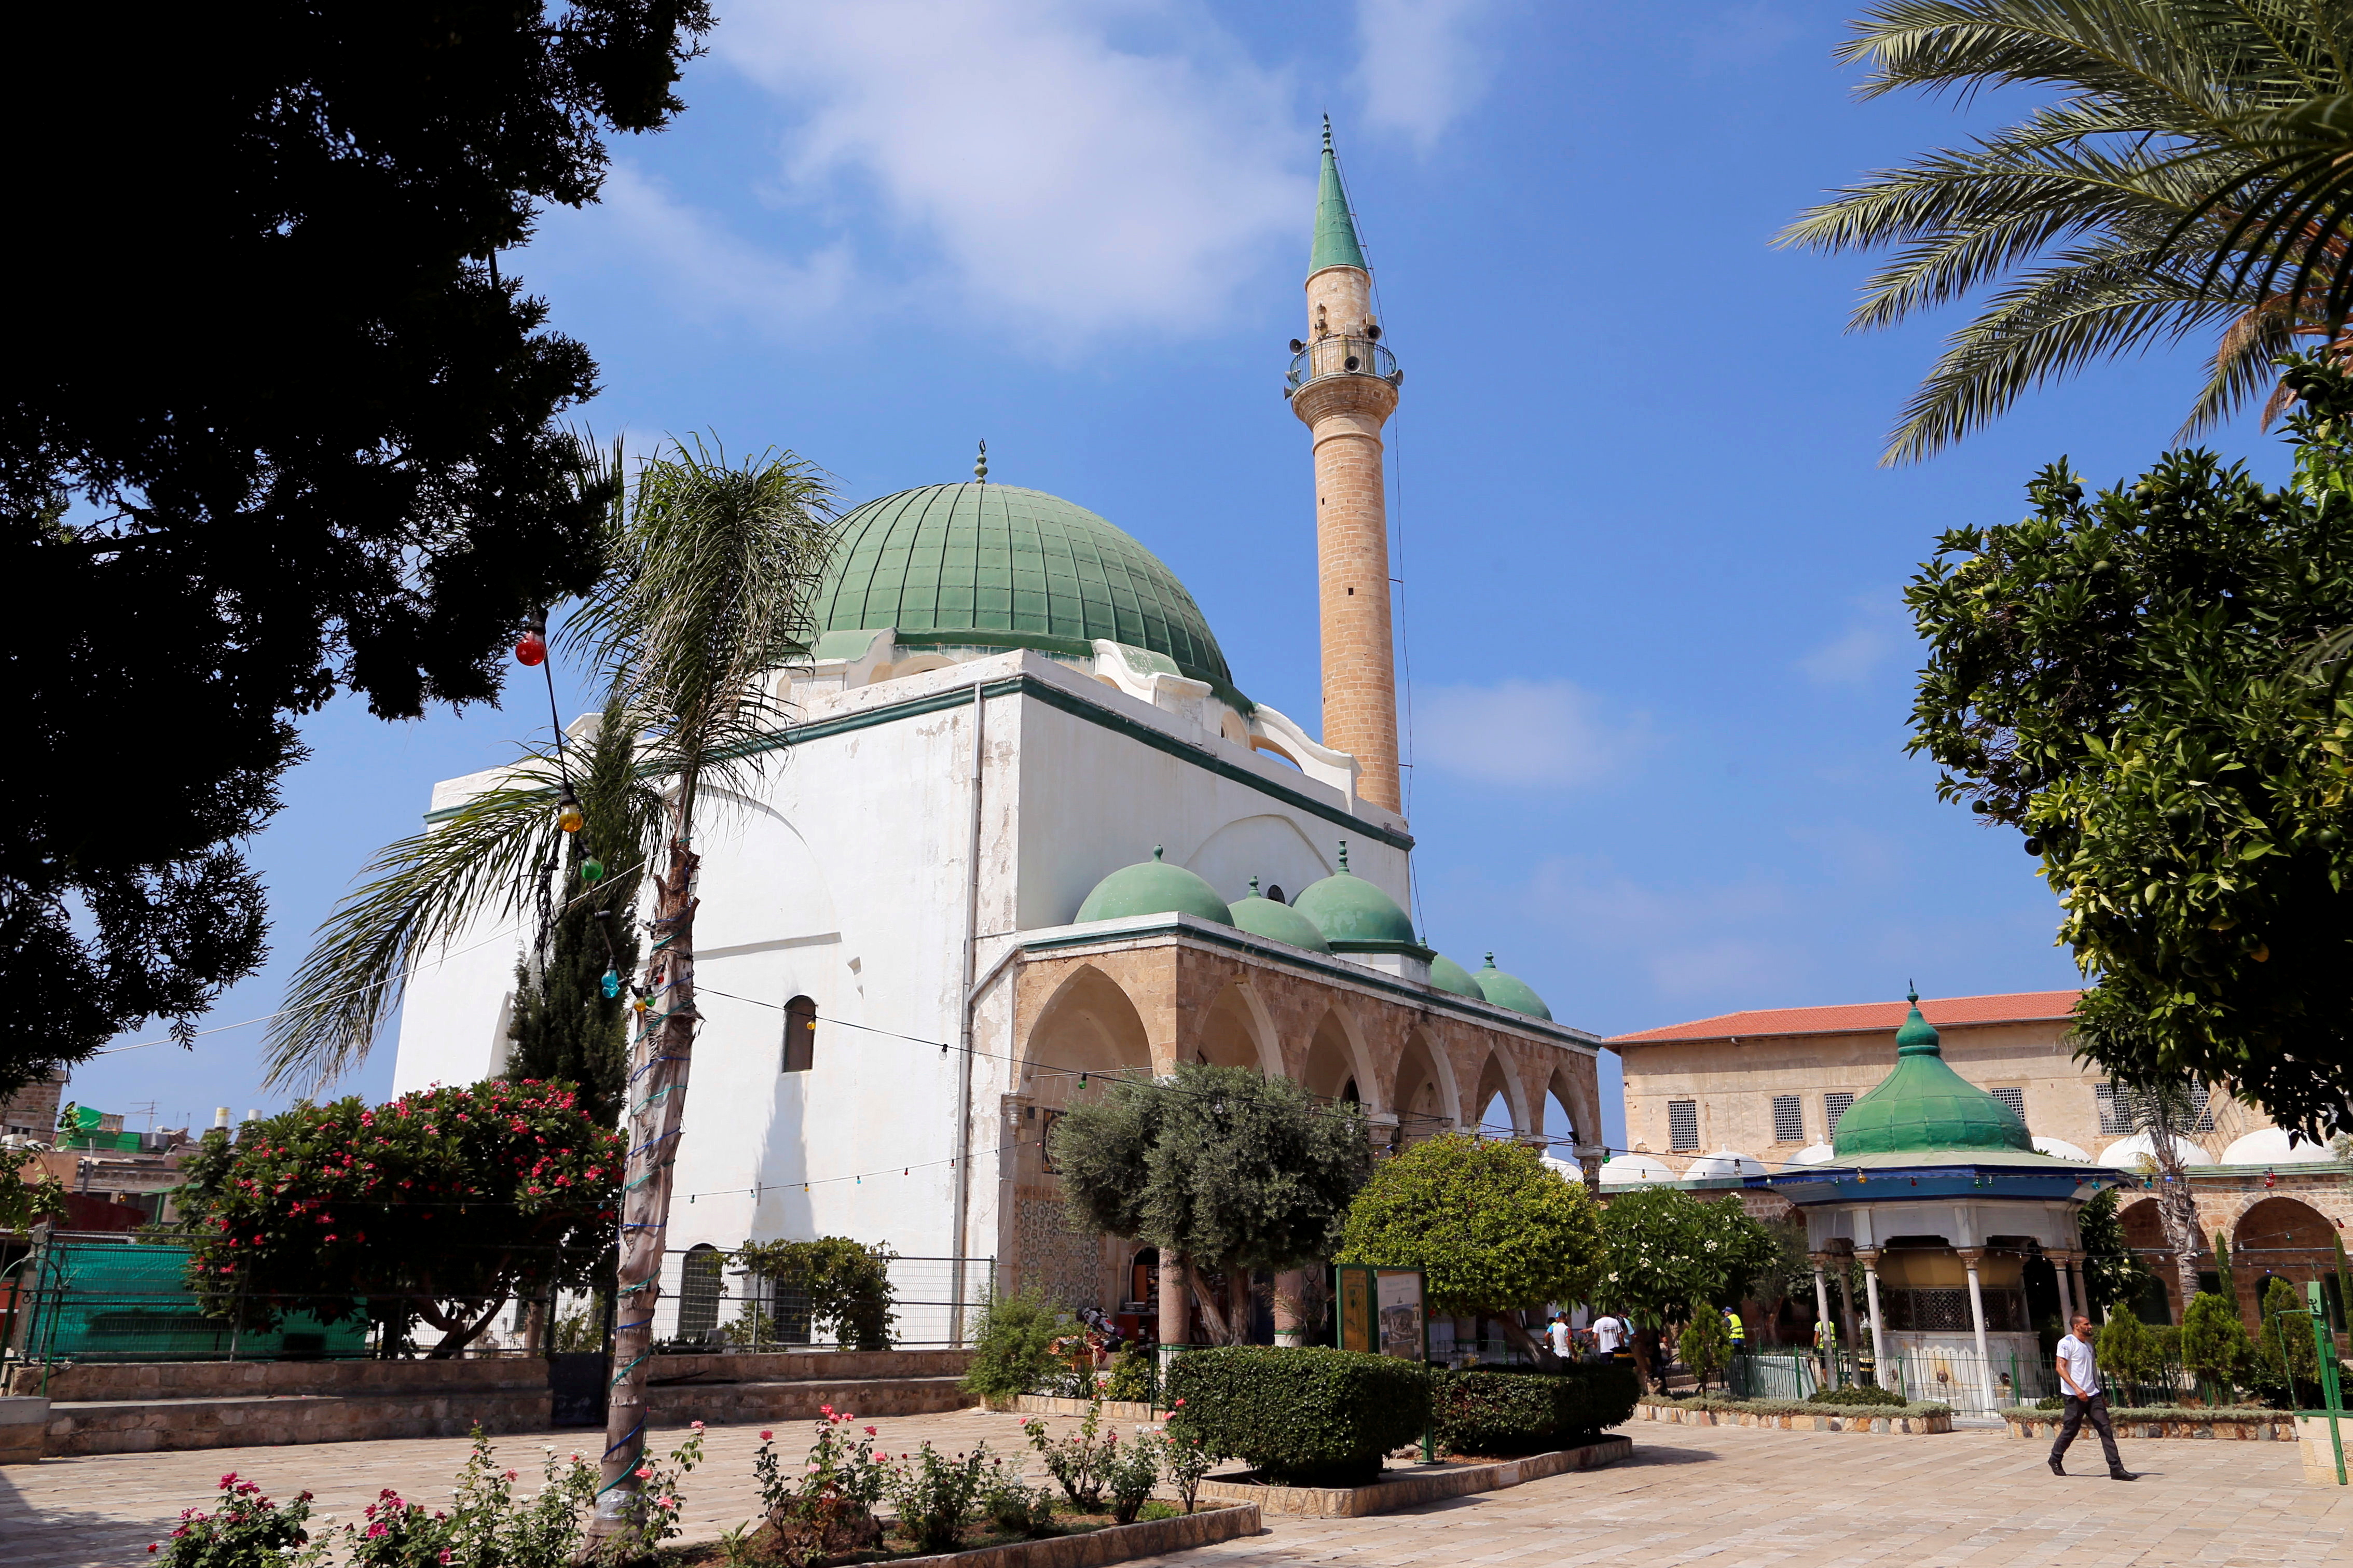 A general view shows Al-Jazzar Mosque, completed in 1781 by Ahmad Pasha al-Jazzar, an Acre-based governor during the Ottoman period in the Old City of Acre